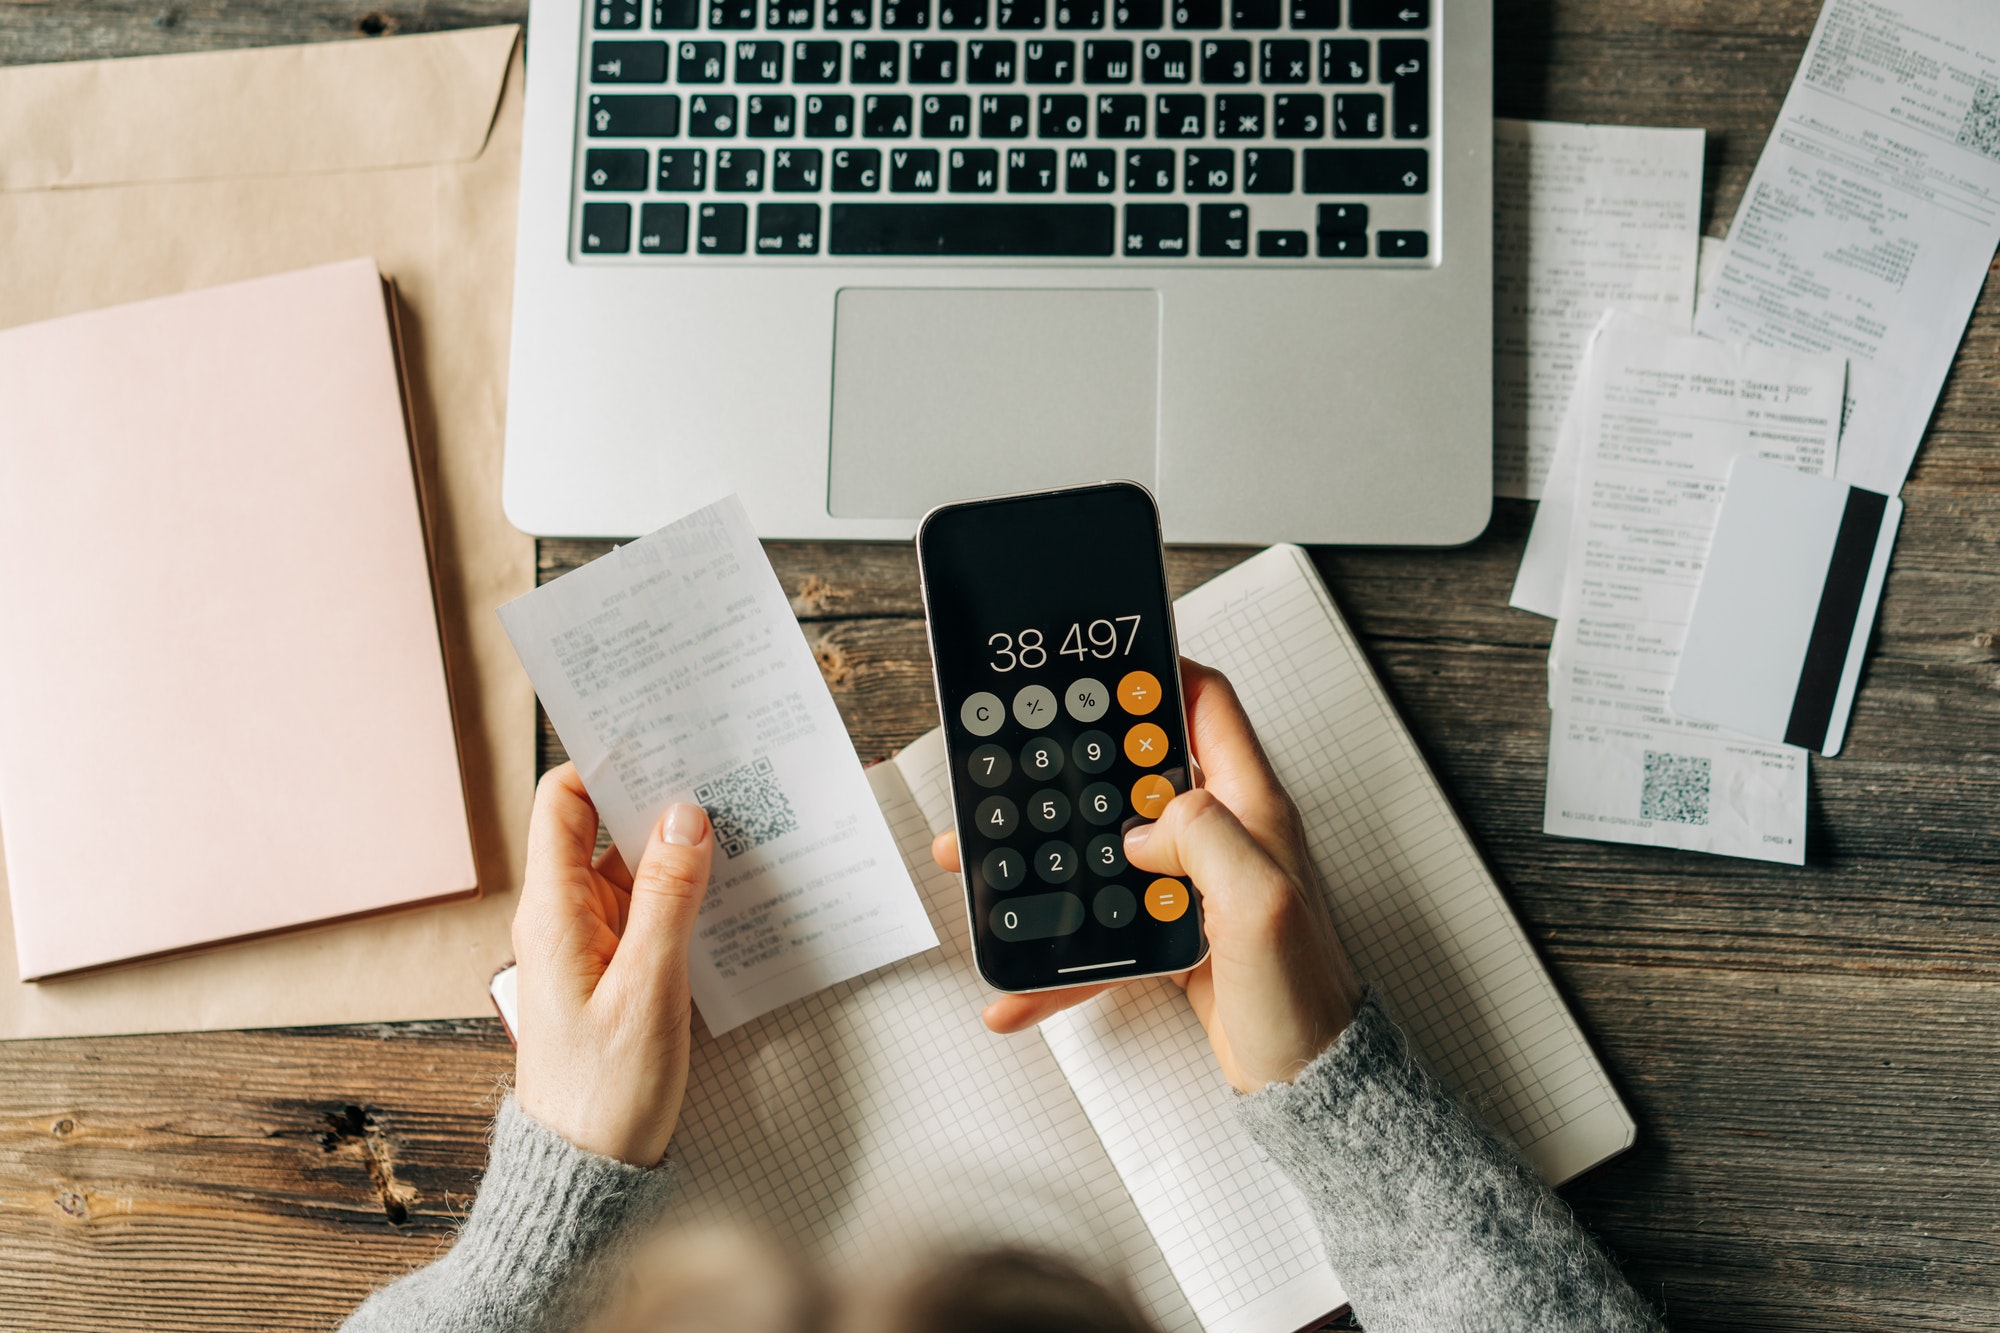 Small Business bookkeeping using a calculator on a phone screen.